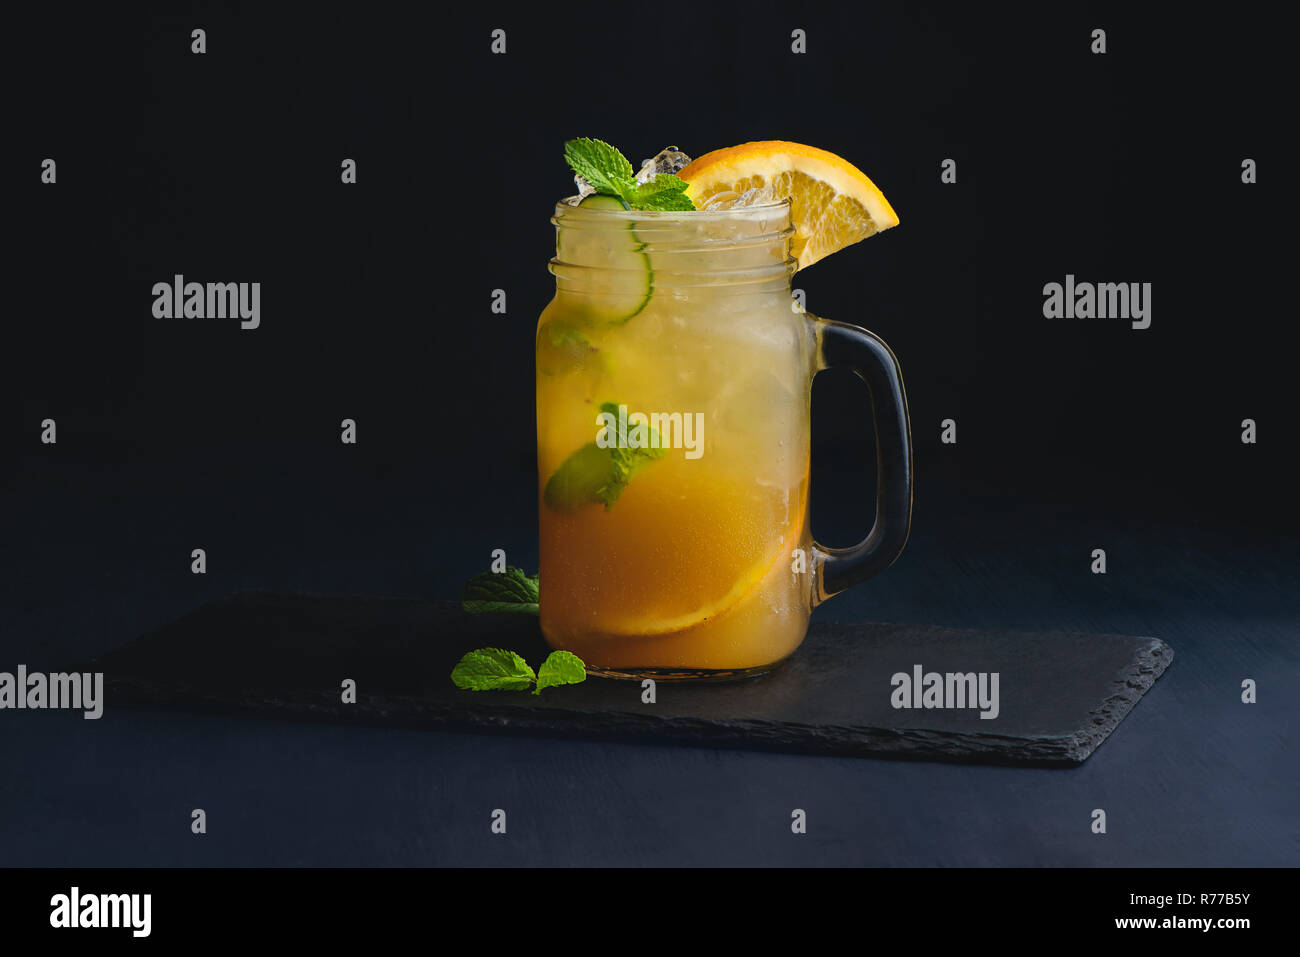 Ice cold citrus cocktail in a vintage glass mason jar. Dark background with copy space for a menu. Stock Photo